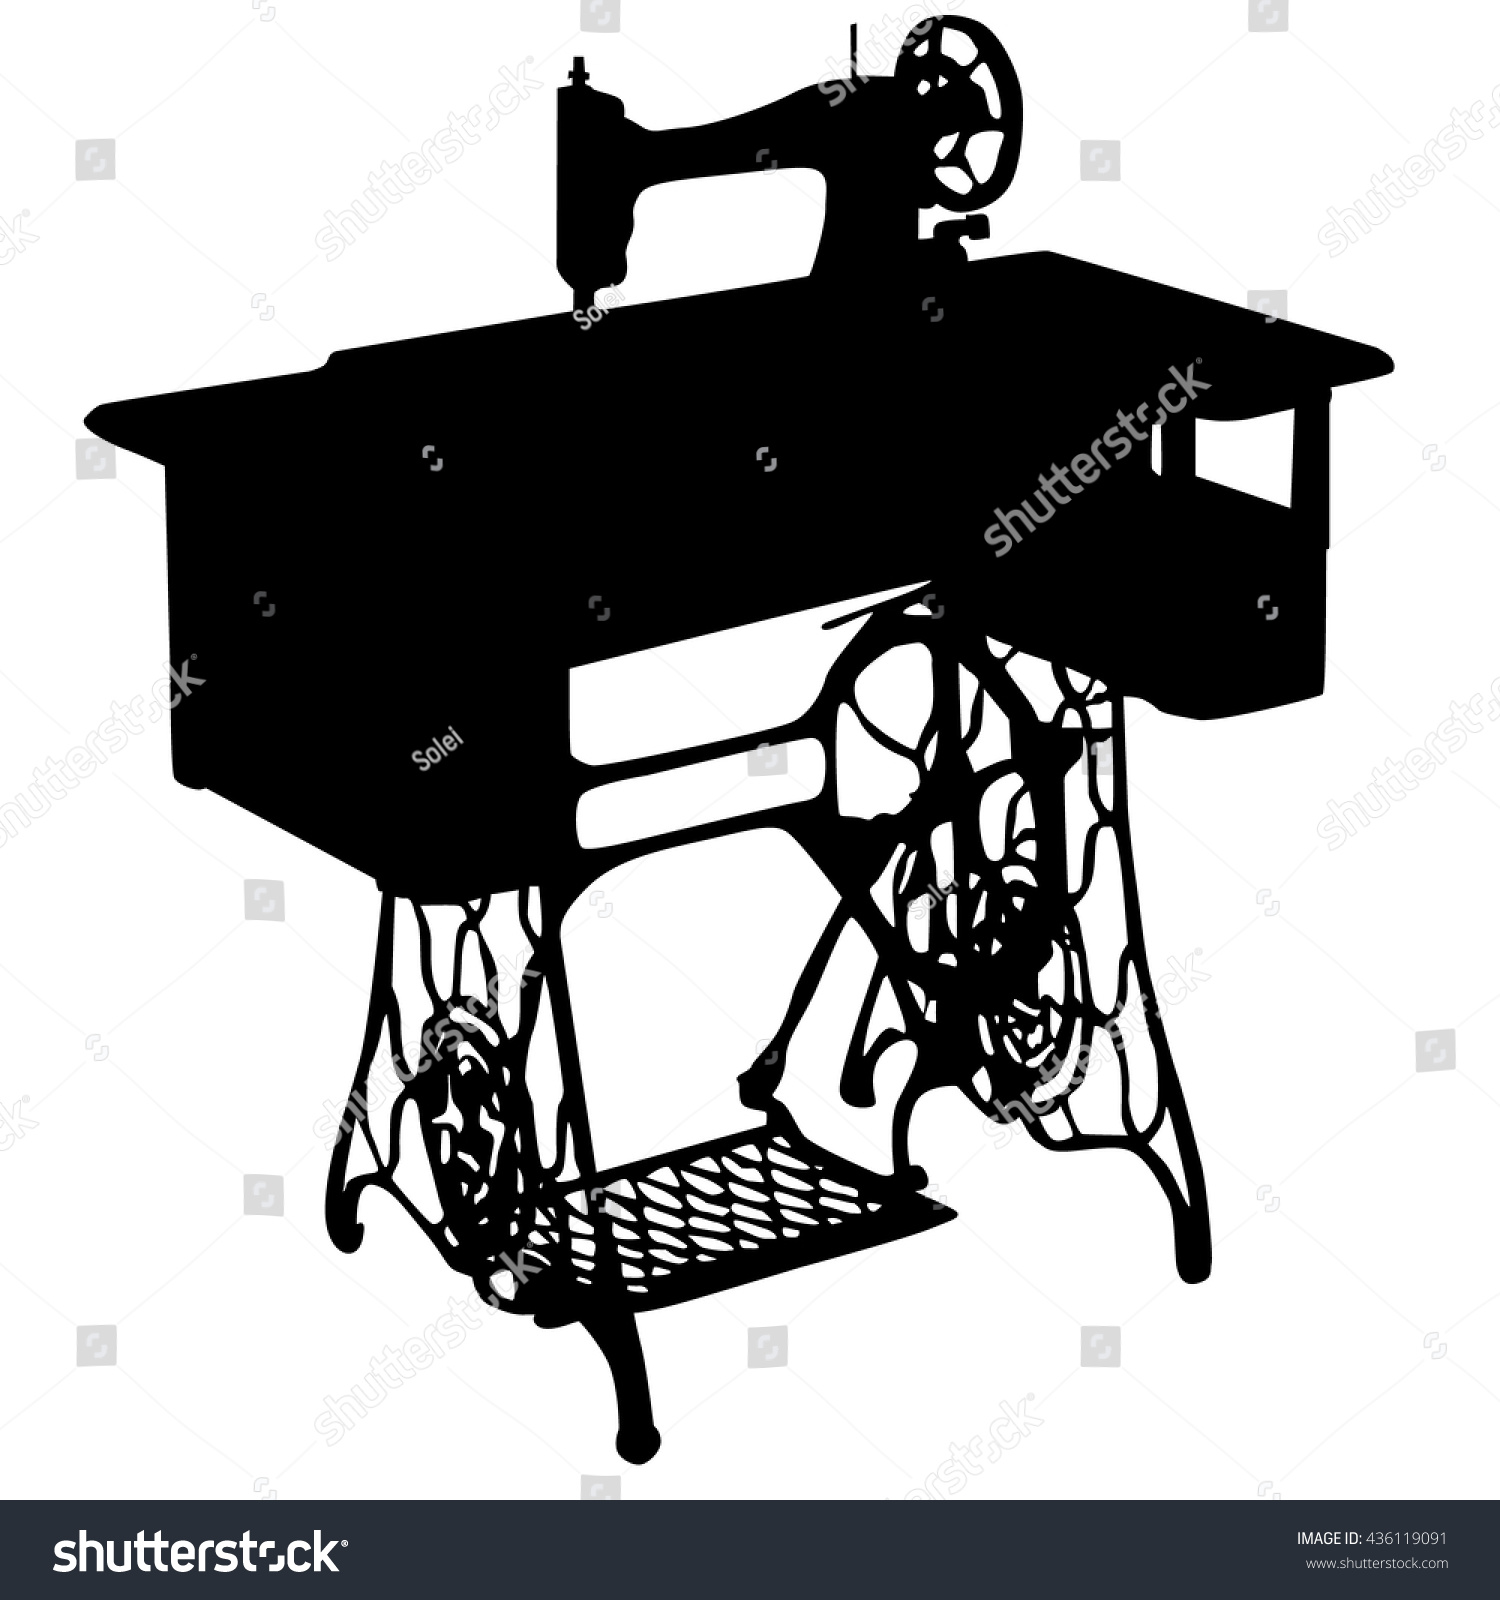 Vintage Sewing Machine Silhouette Stock Vector 436119091 Shutterstock 